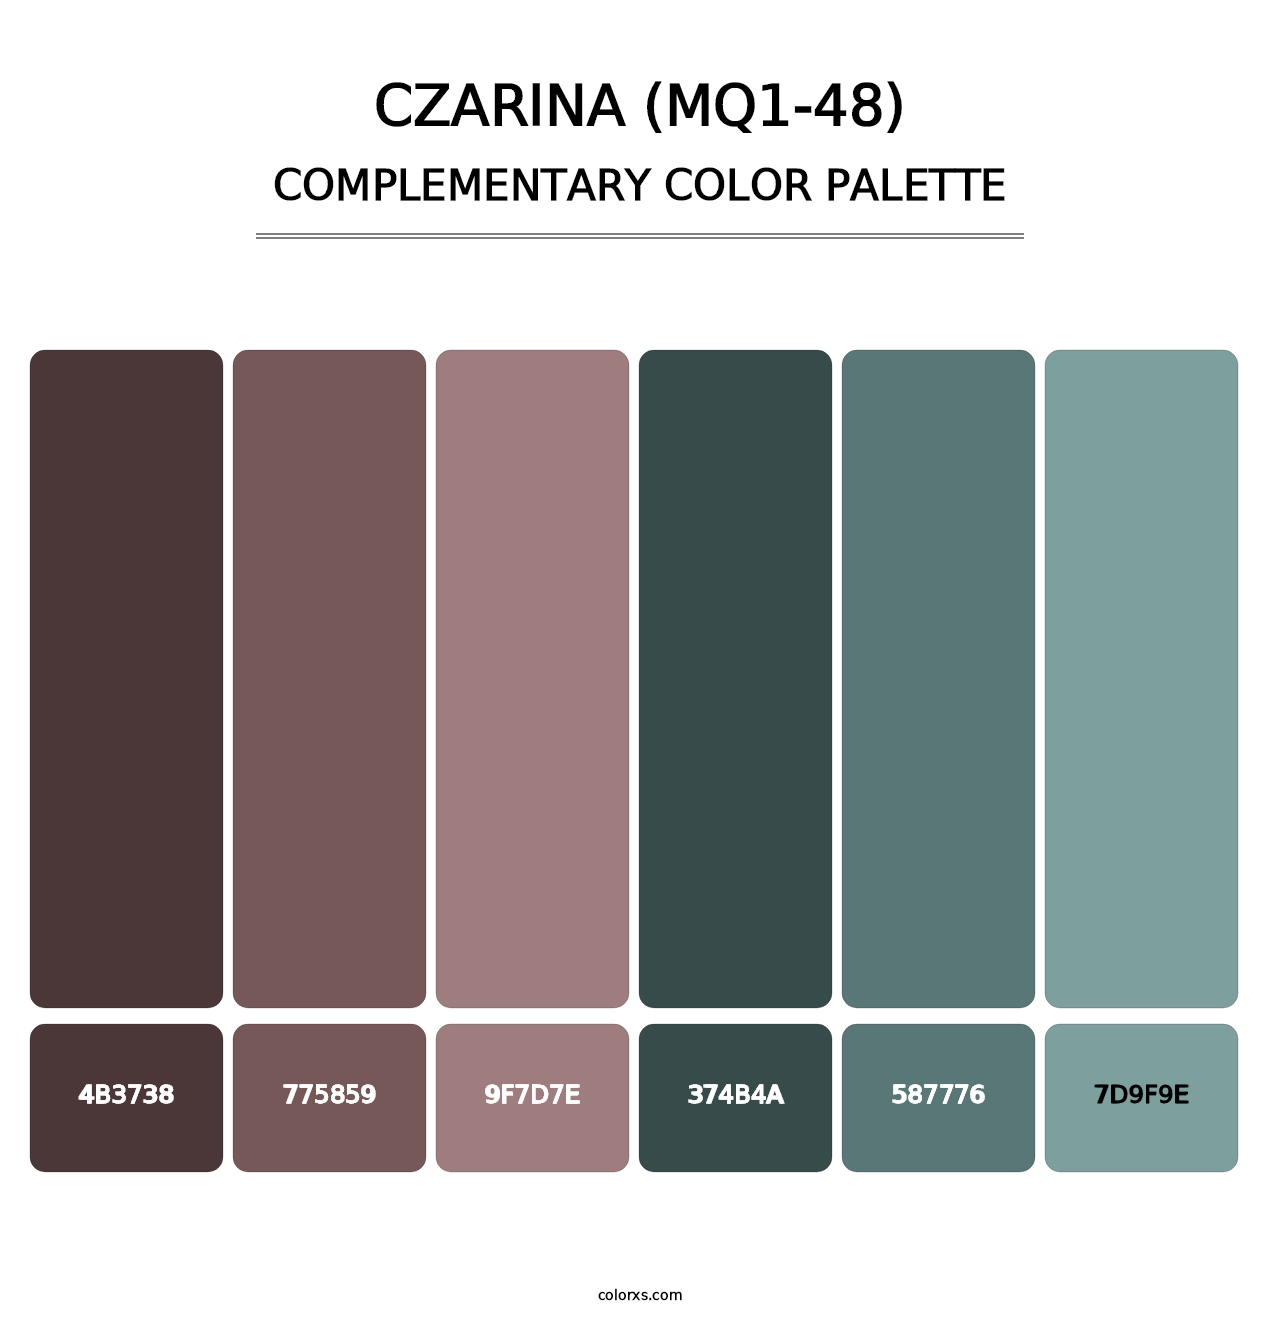 Czarina (MQ1-48) - Complementary Color Palette